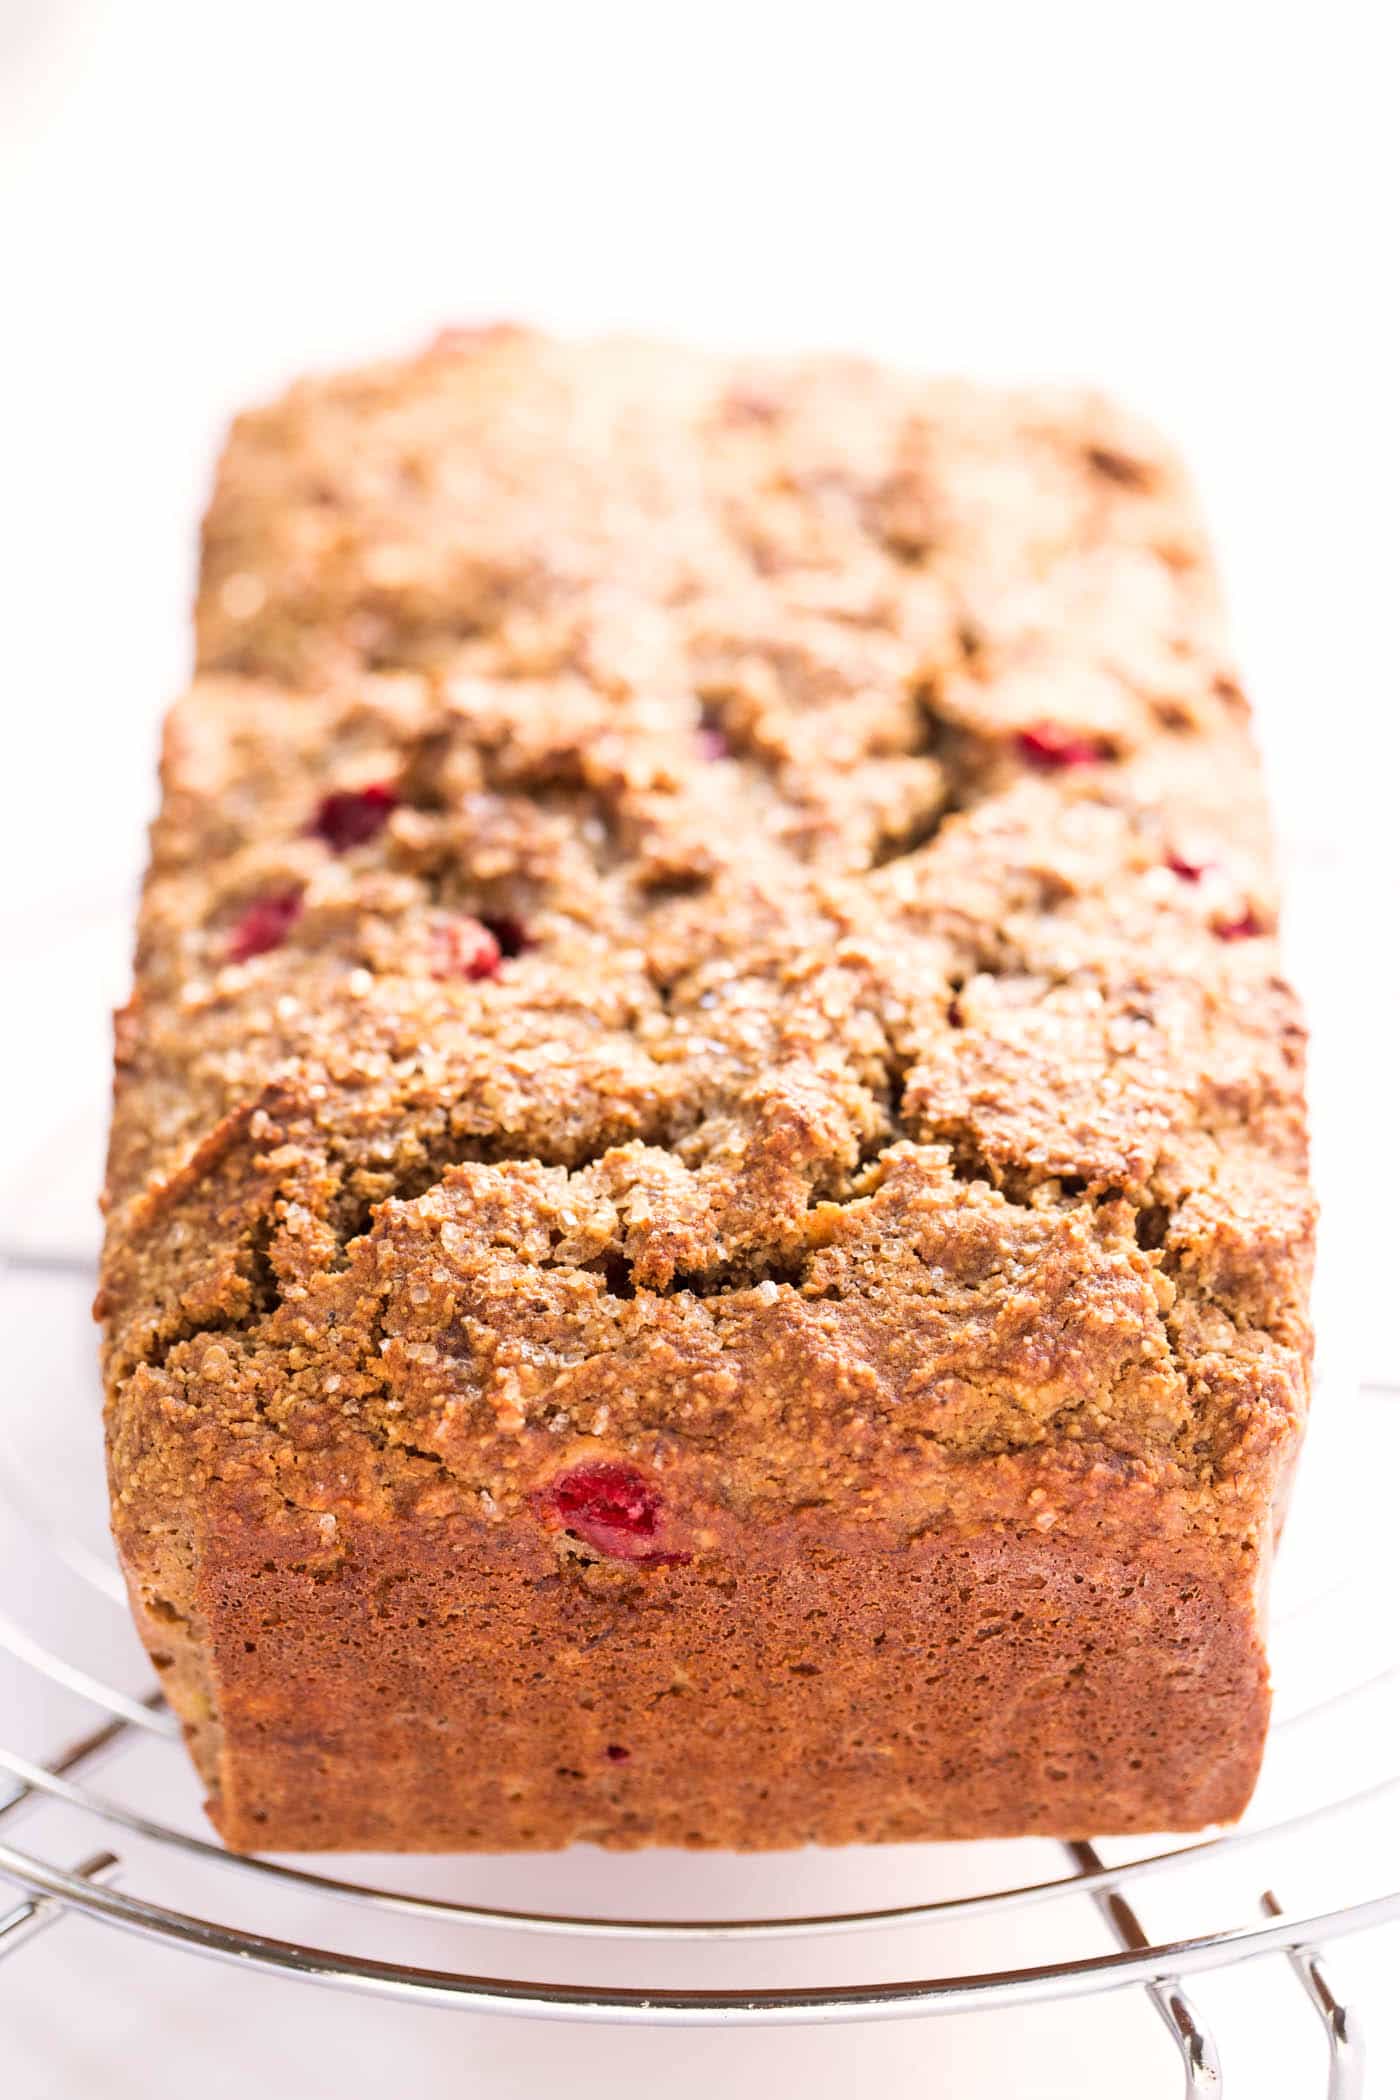 This Cranberry Quinoa Banana Bread is super HEALTHY -- made with quinoa flour, almond flour, banana and sweetened with honey and fresh cranberries!